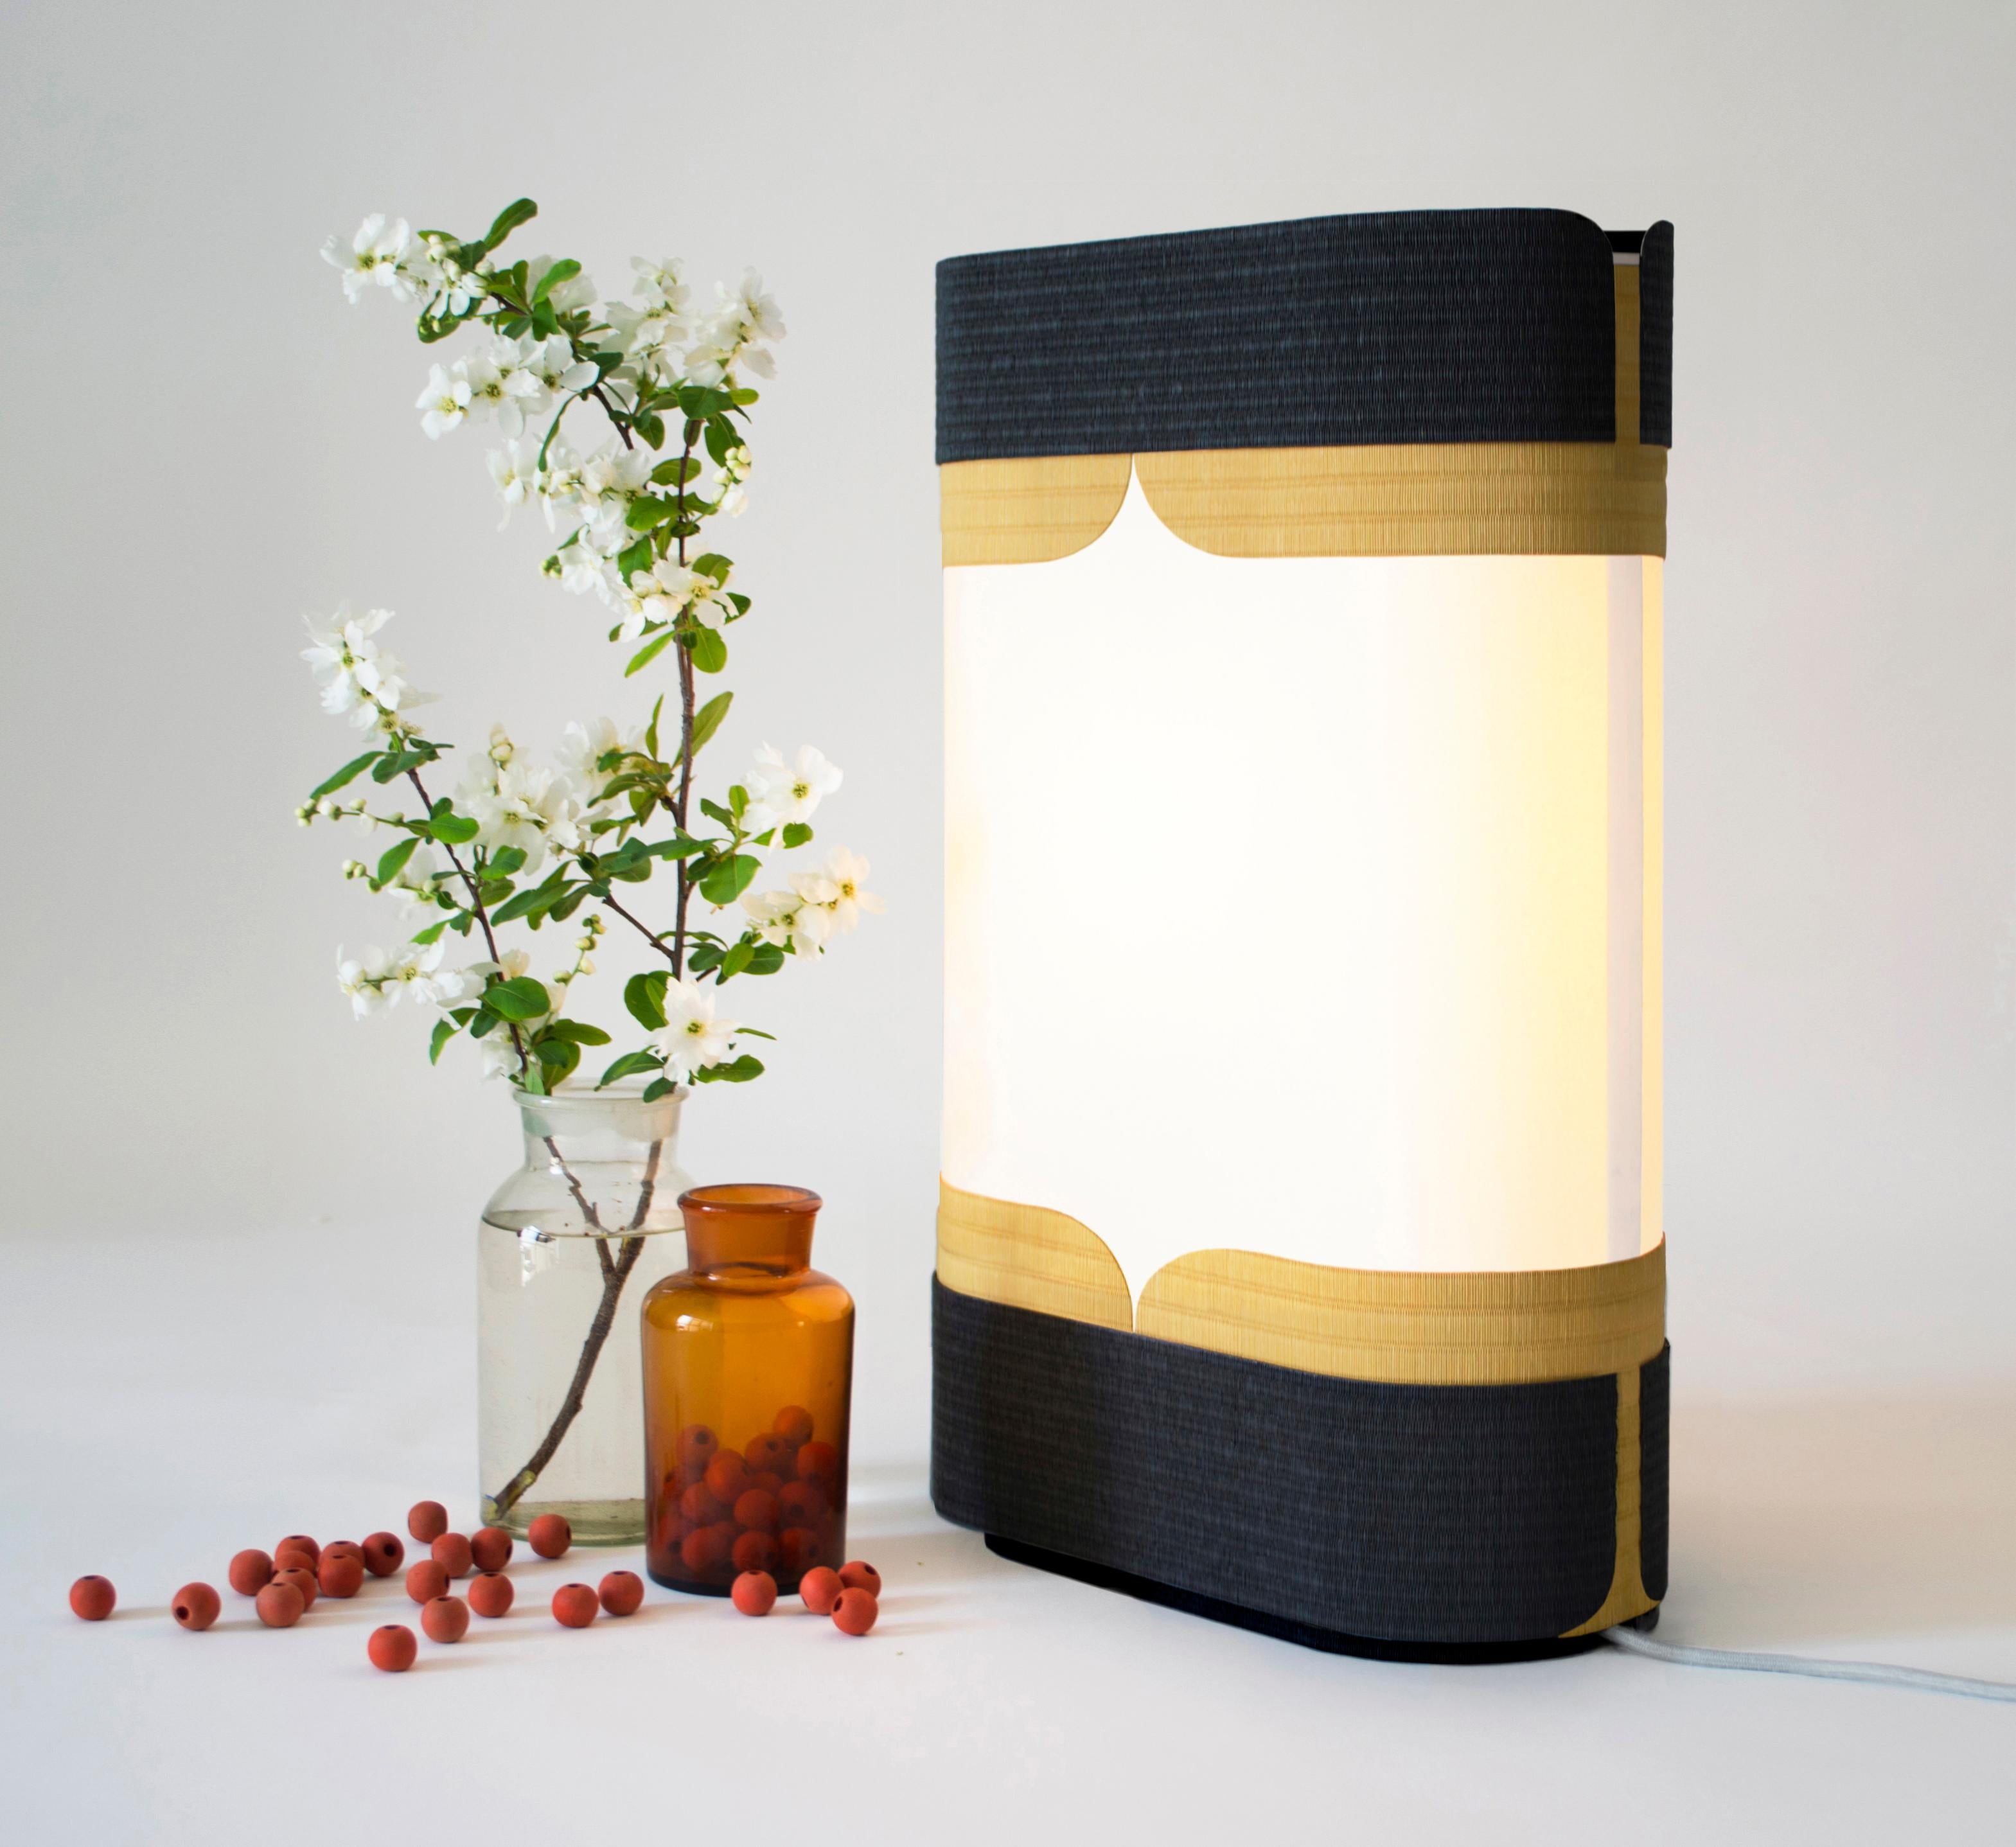 Kensho light by Astrid Hauton
Dimensions: W 37 x D 18 x H 59 cm
Materials: woven washi paper, waxed black Valchromat, polyphane, Japanese paper, removable cover in
opalescent plexiglass.

« Kensho », in Zen tradition, refers to the experience